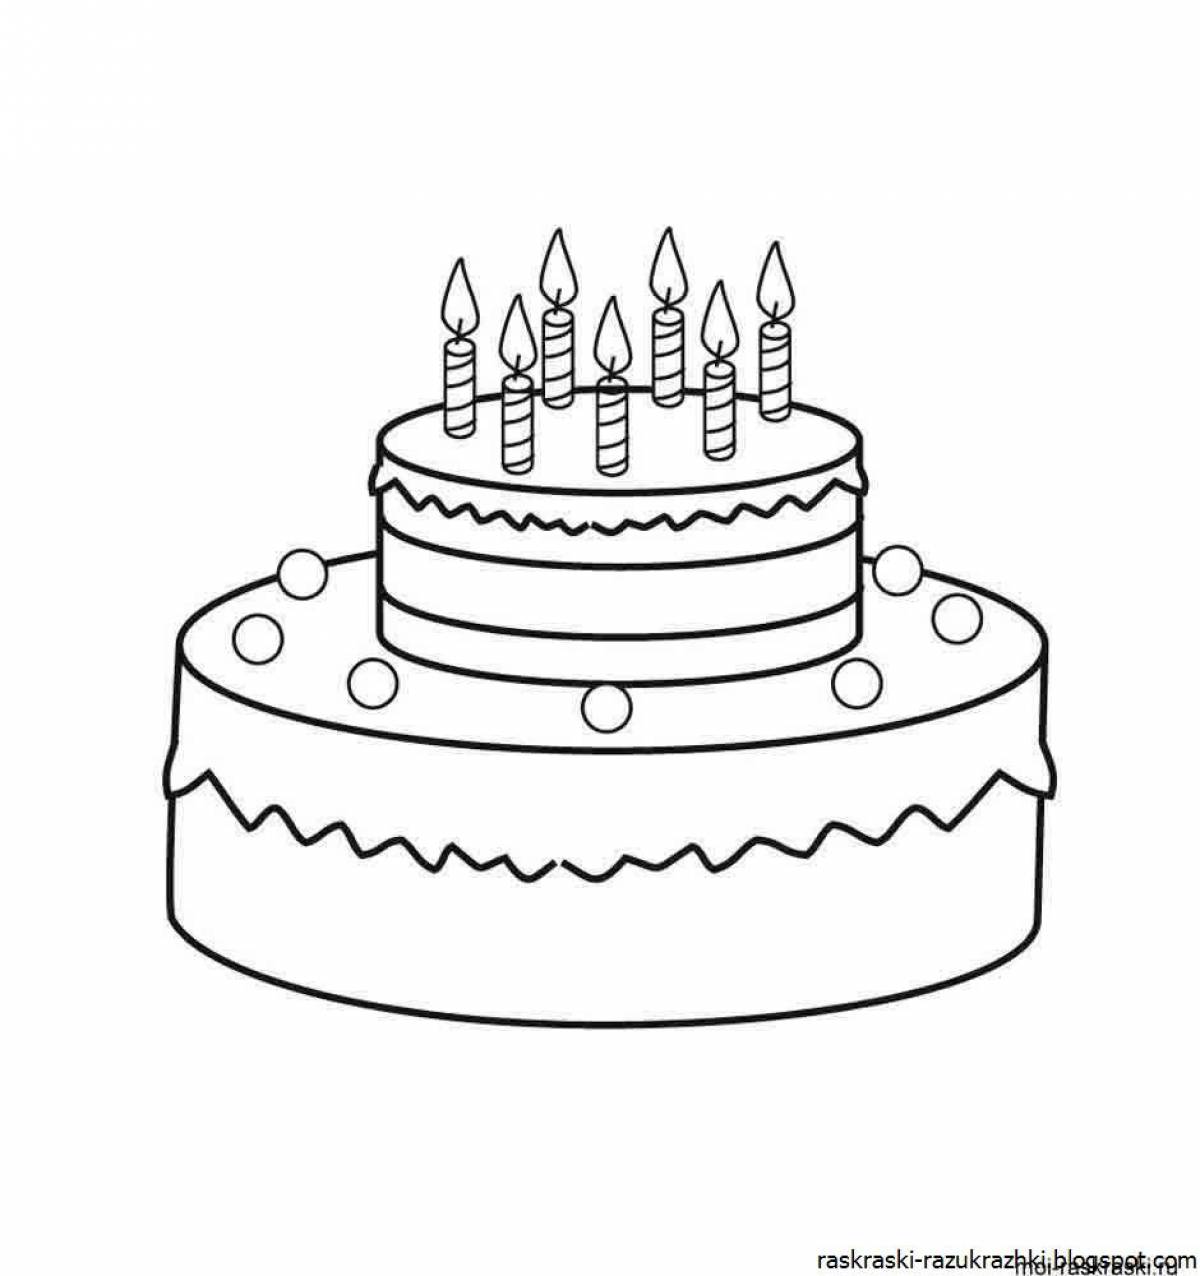 Gorgeous cake coloring book for kids